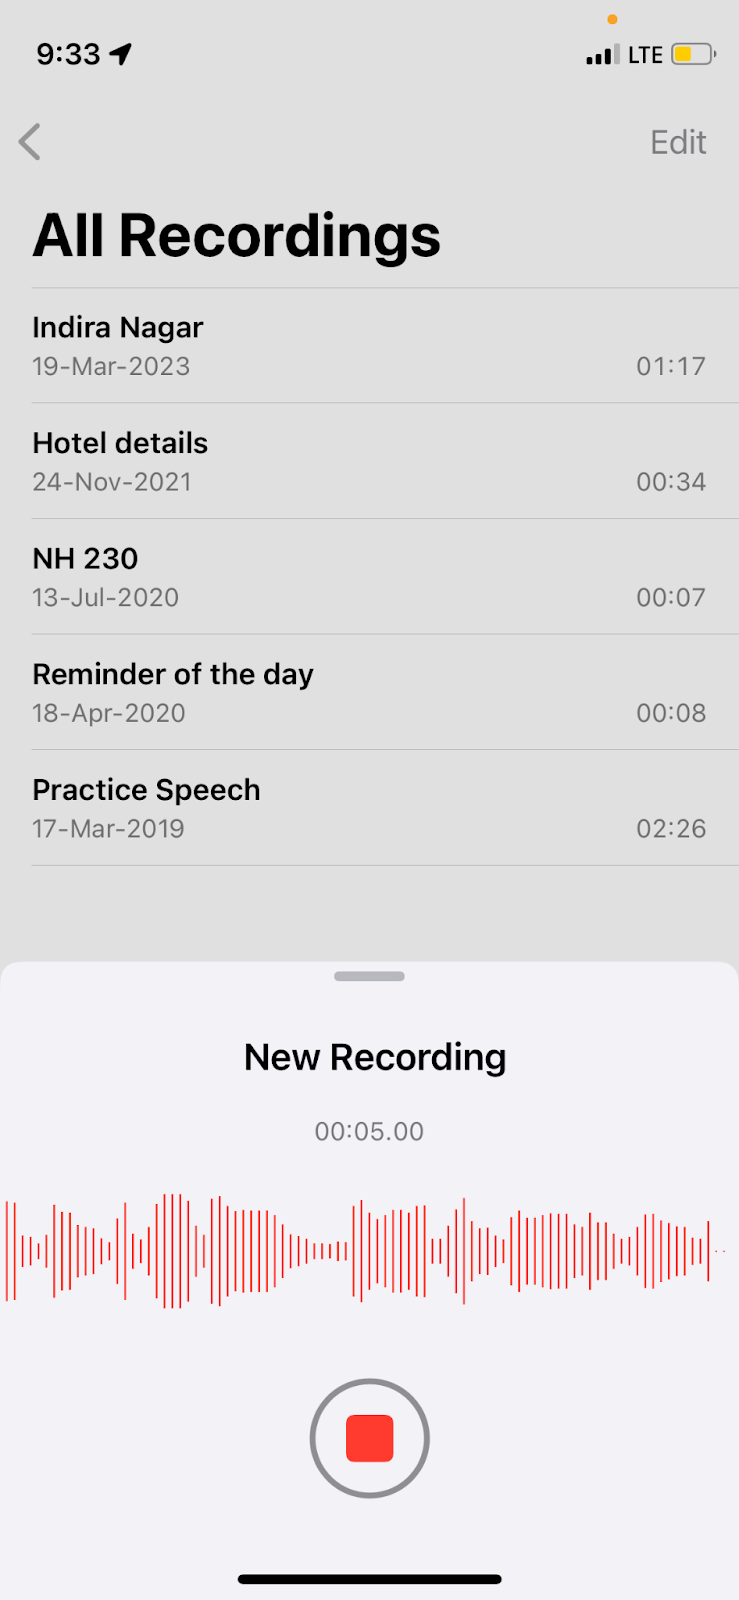 How to record a voice note on iPhone - Record a voice note